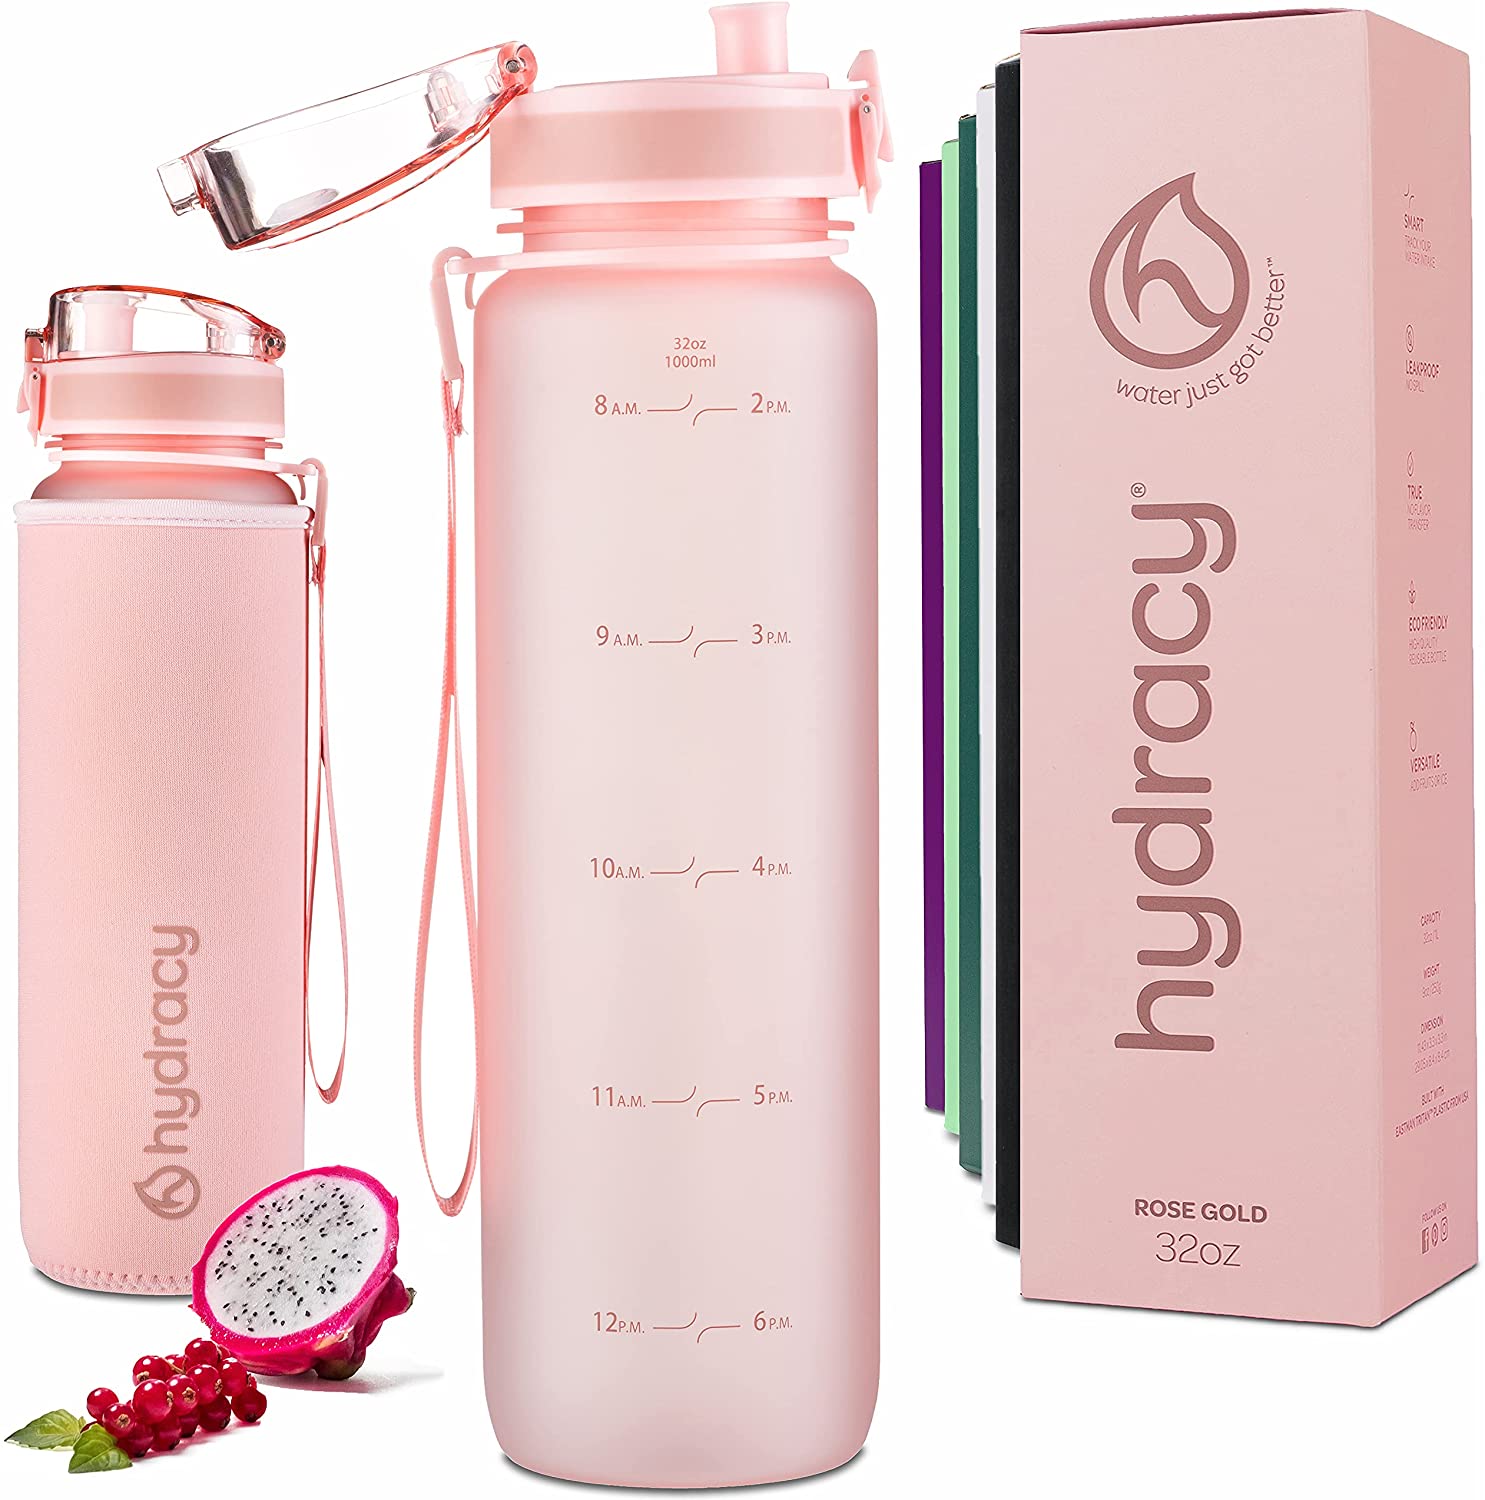 https://www.dontwasteyourmoney.com/wp-content/uploads/2021/08/hydracy-bpa-free-32-ounce-reusable-water-bottle-reusable-water-bottle.jpg